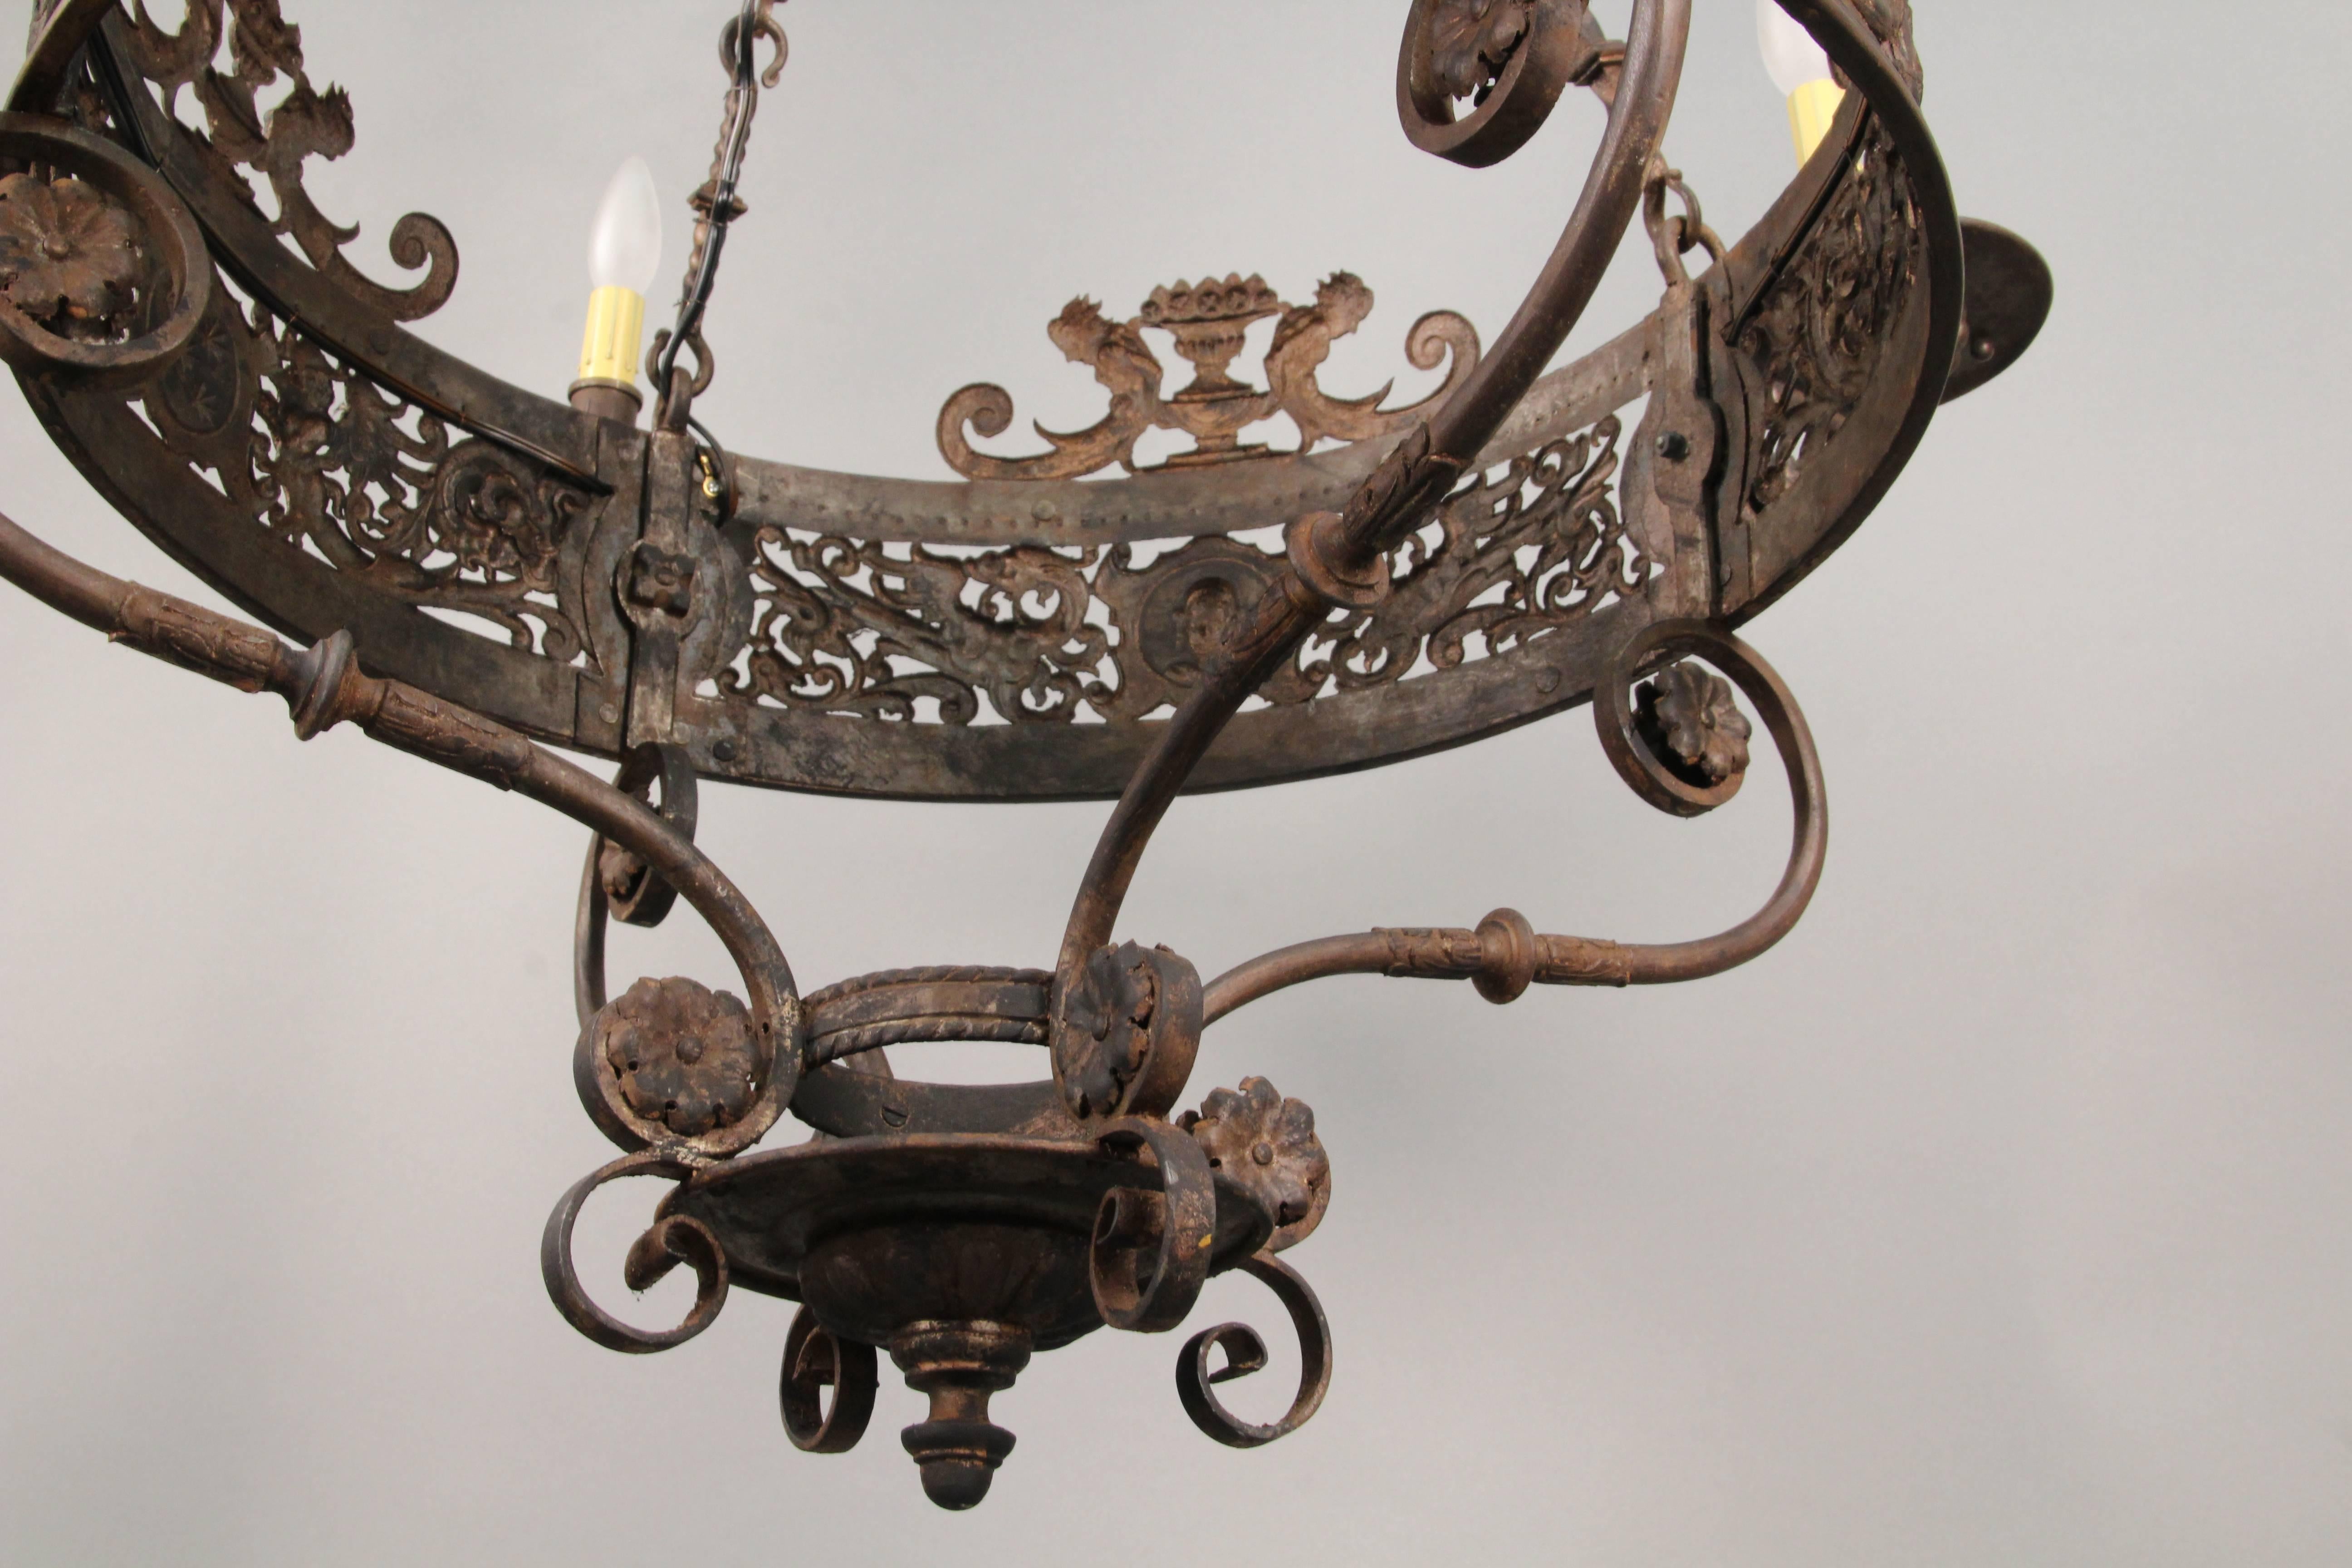 Renaissance Revival Incredible 1920s Antique Chandelier Attributed to Oscar Bach